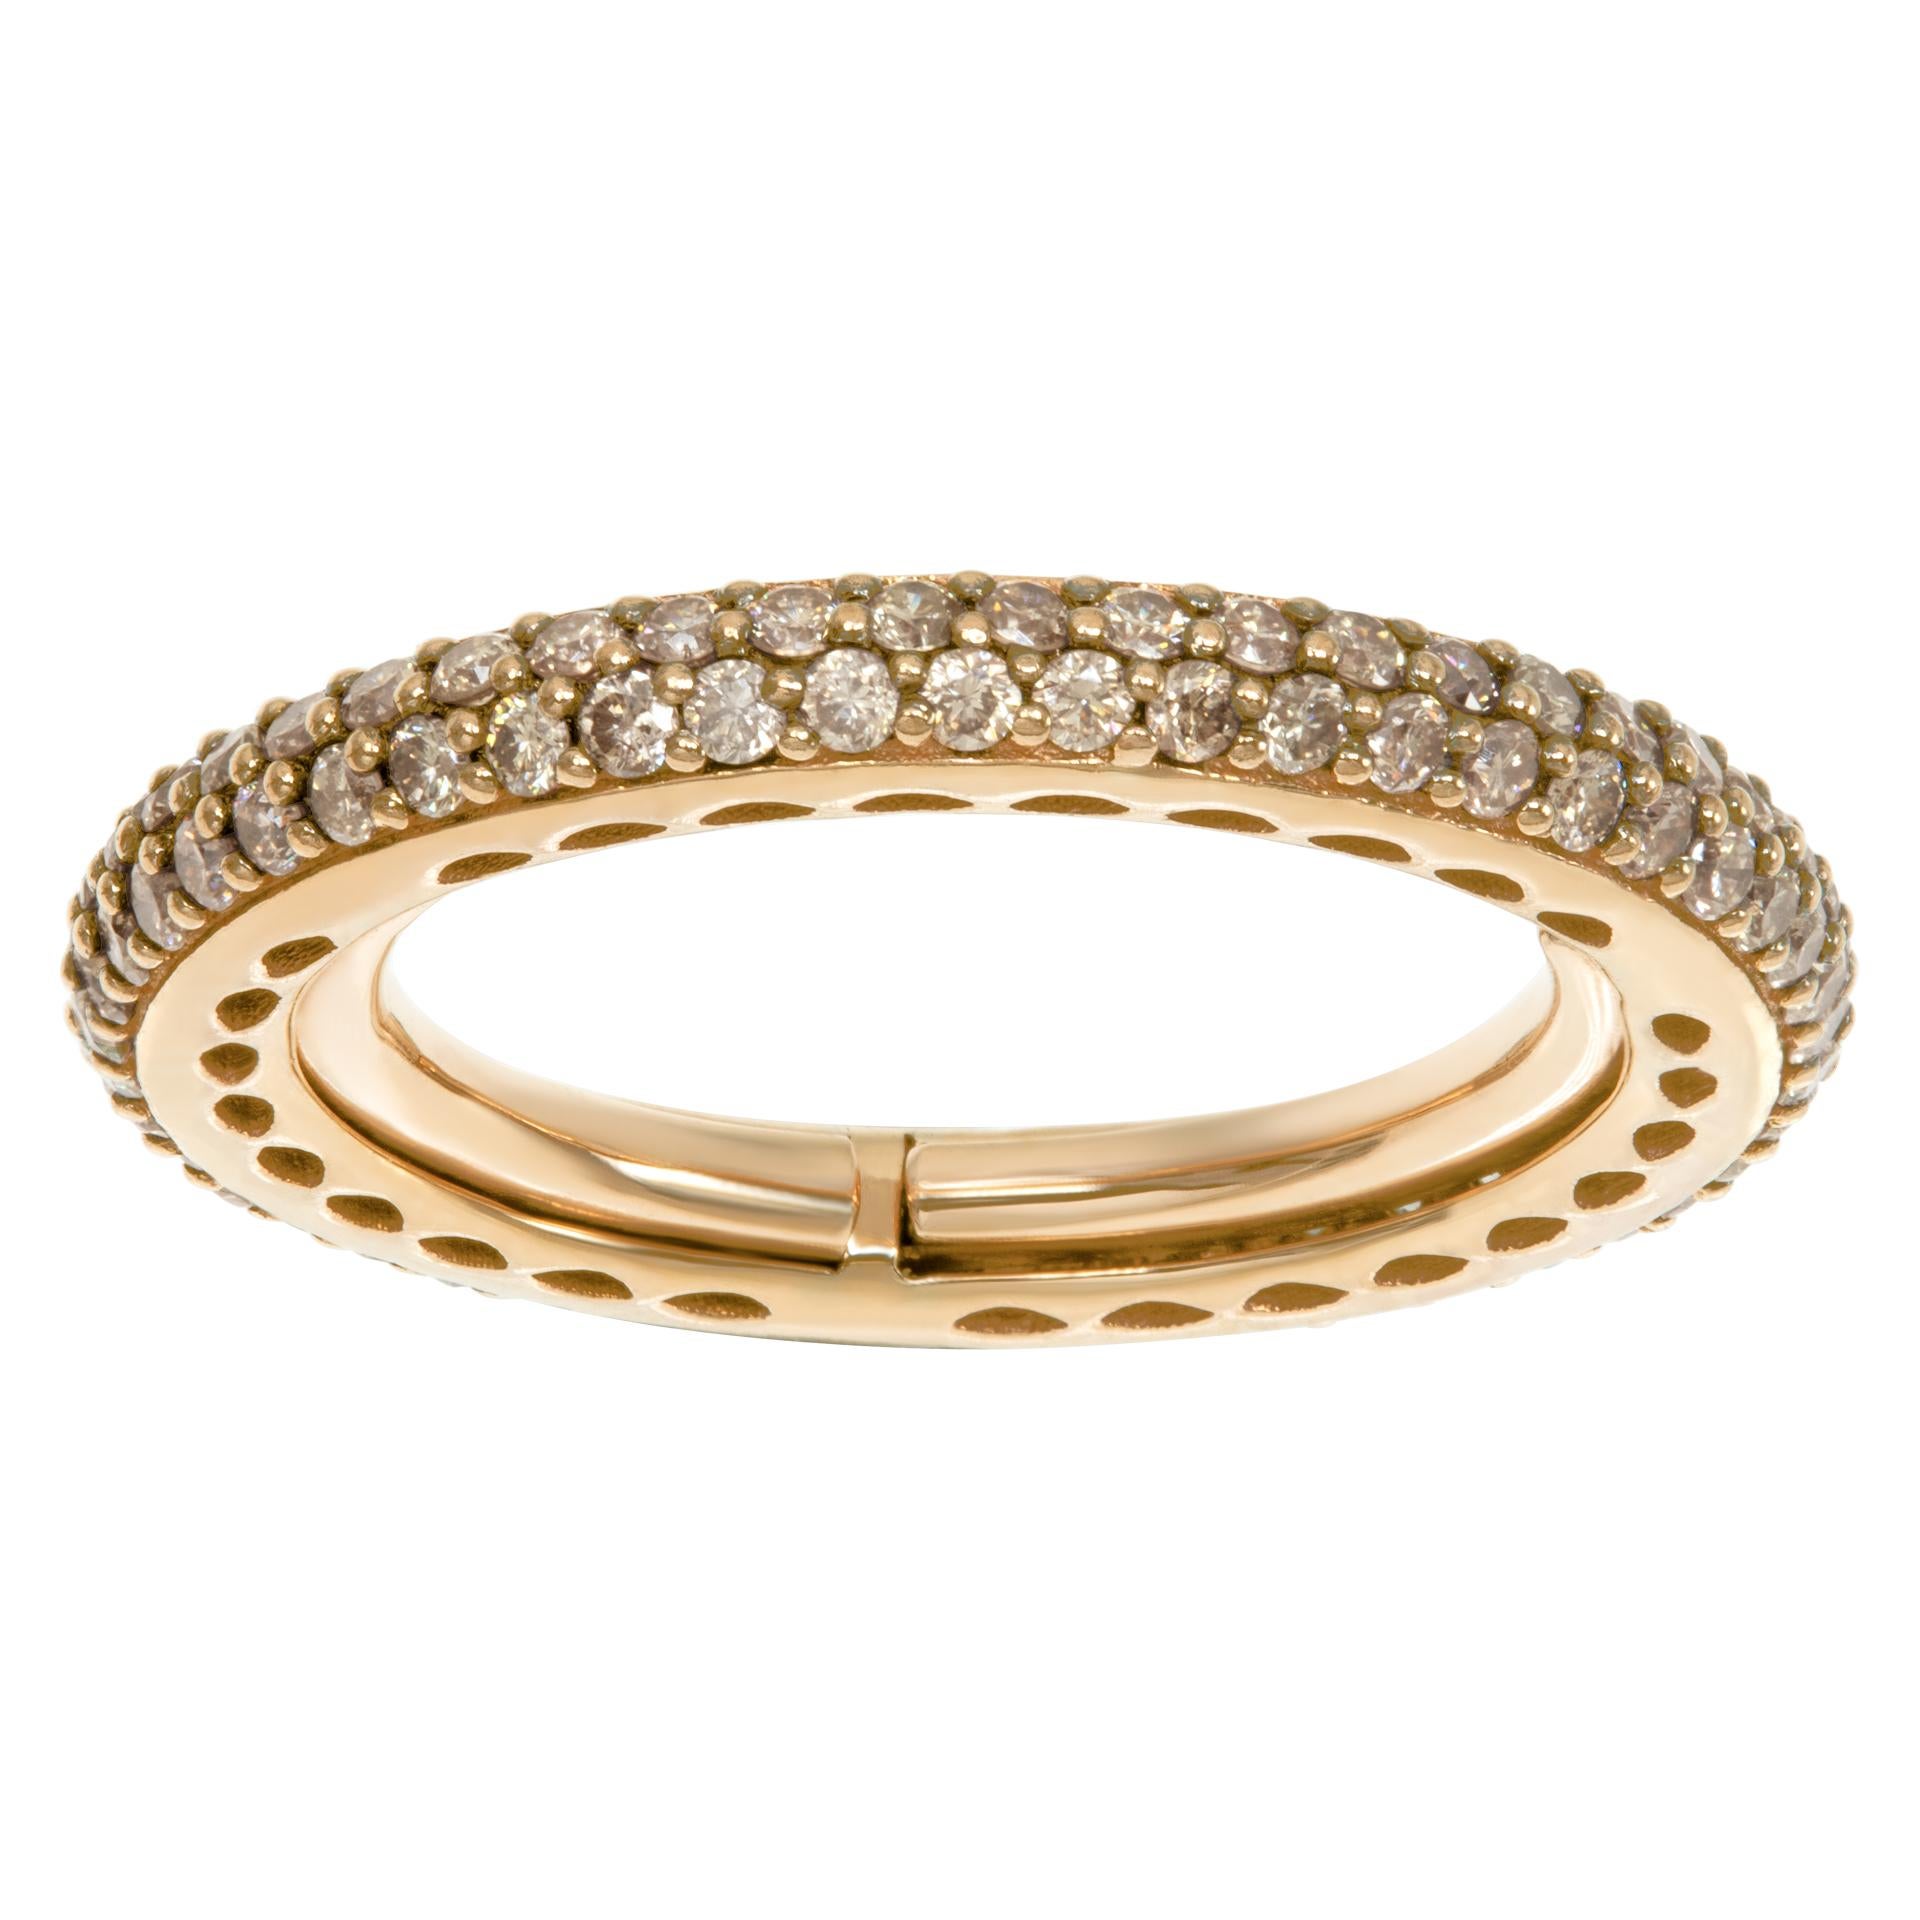 Champaign diamonds eternity band in rose gold. For Sale